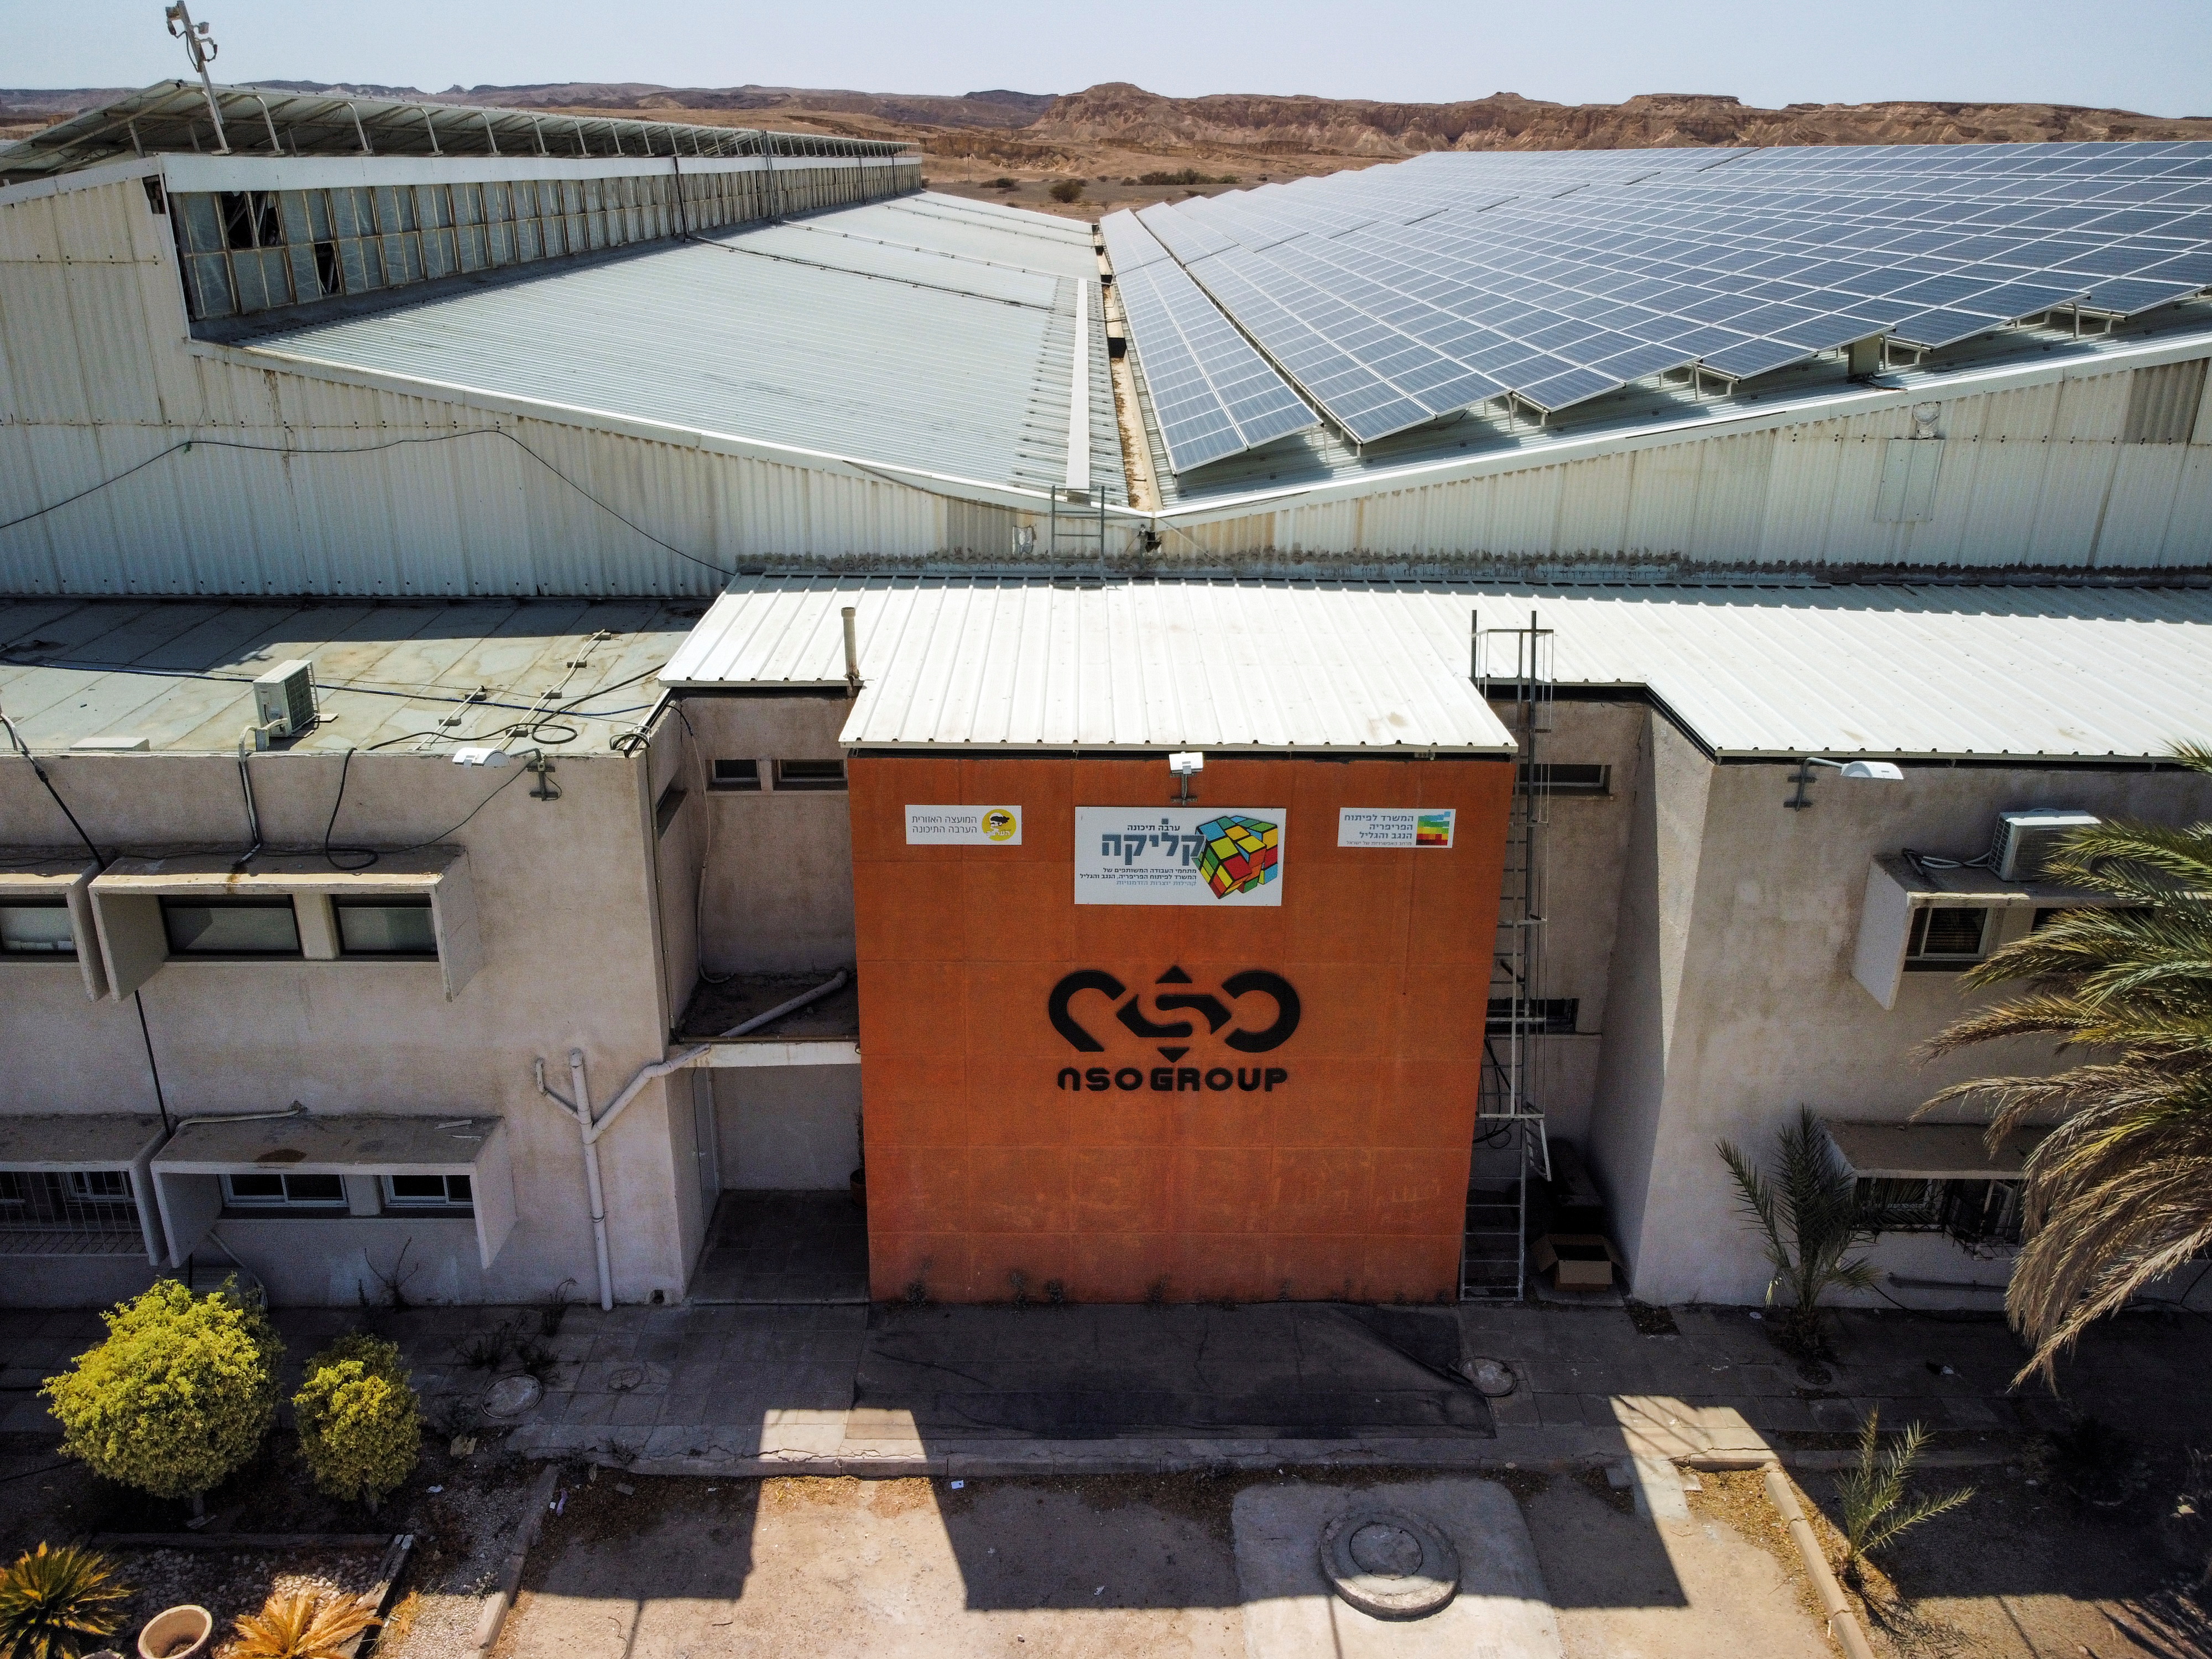 An aerial view shows the logo of Israeli cyber firm NSO Group at one of its branches in the Arava Desert, southern Israel